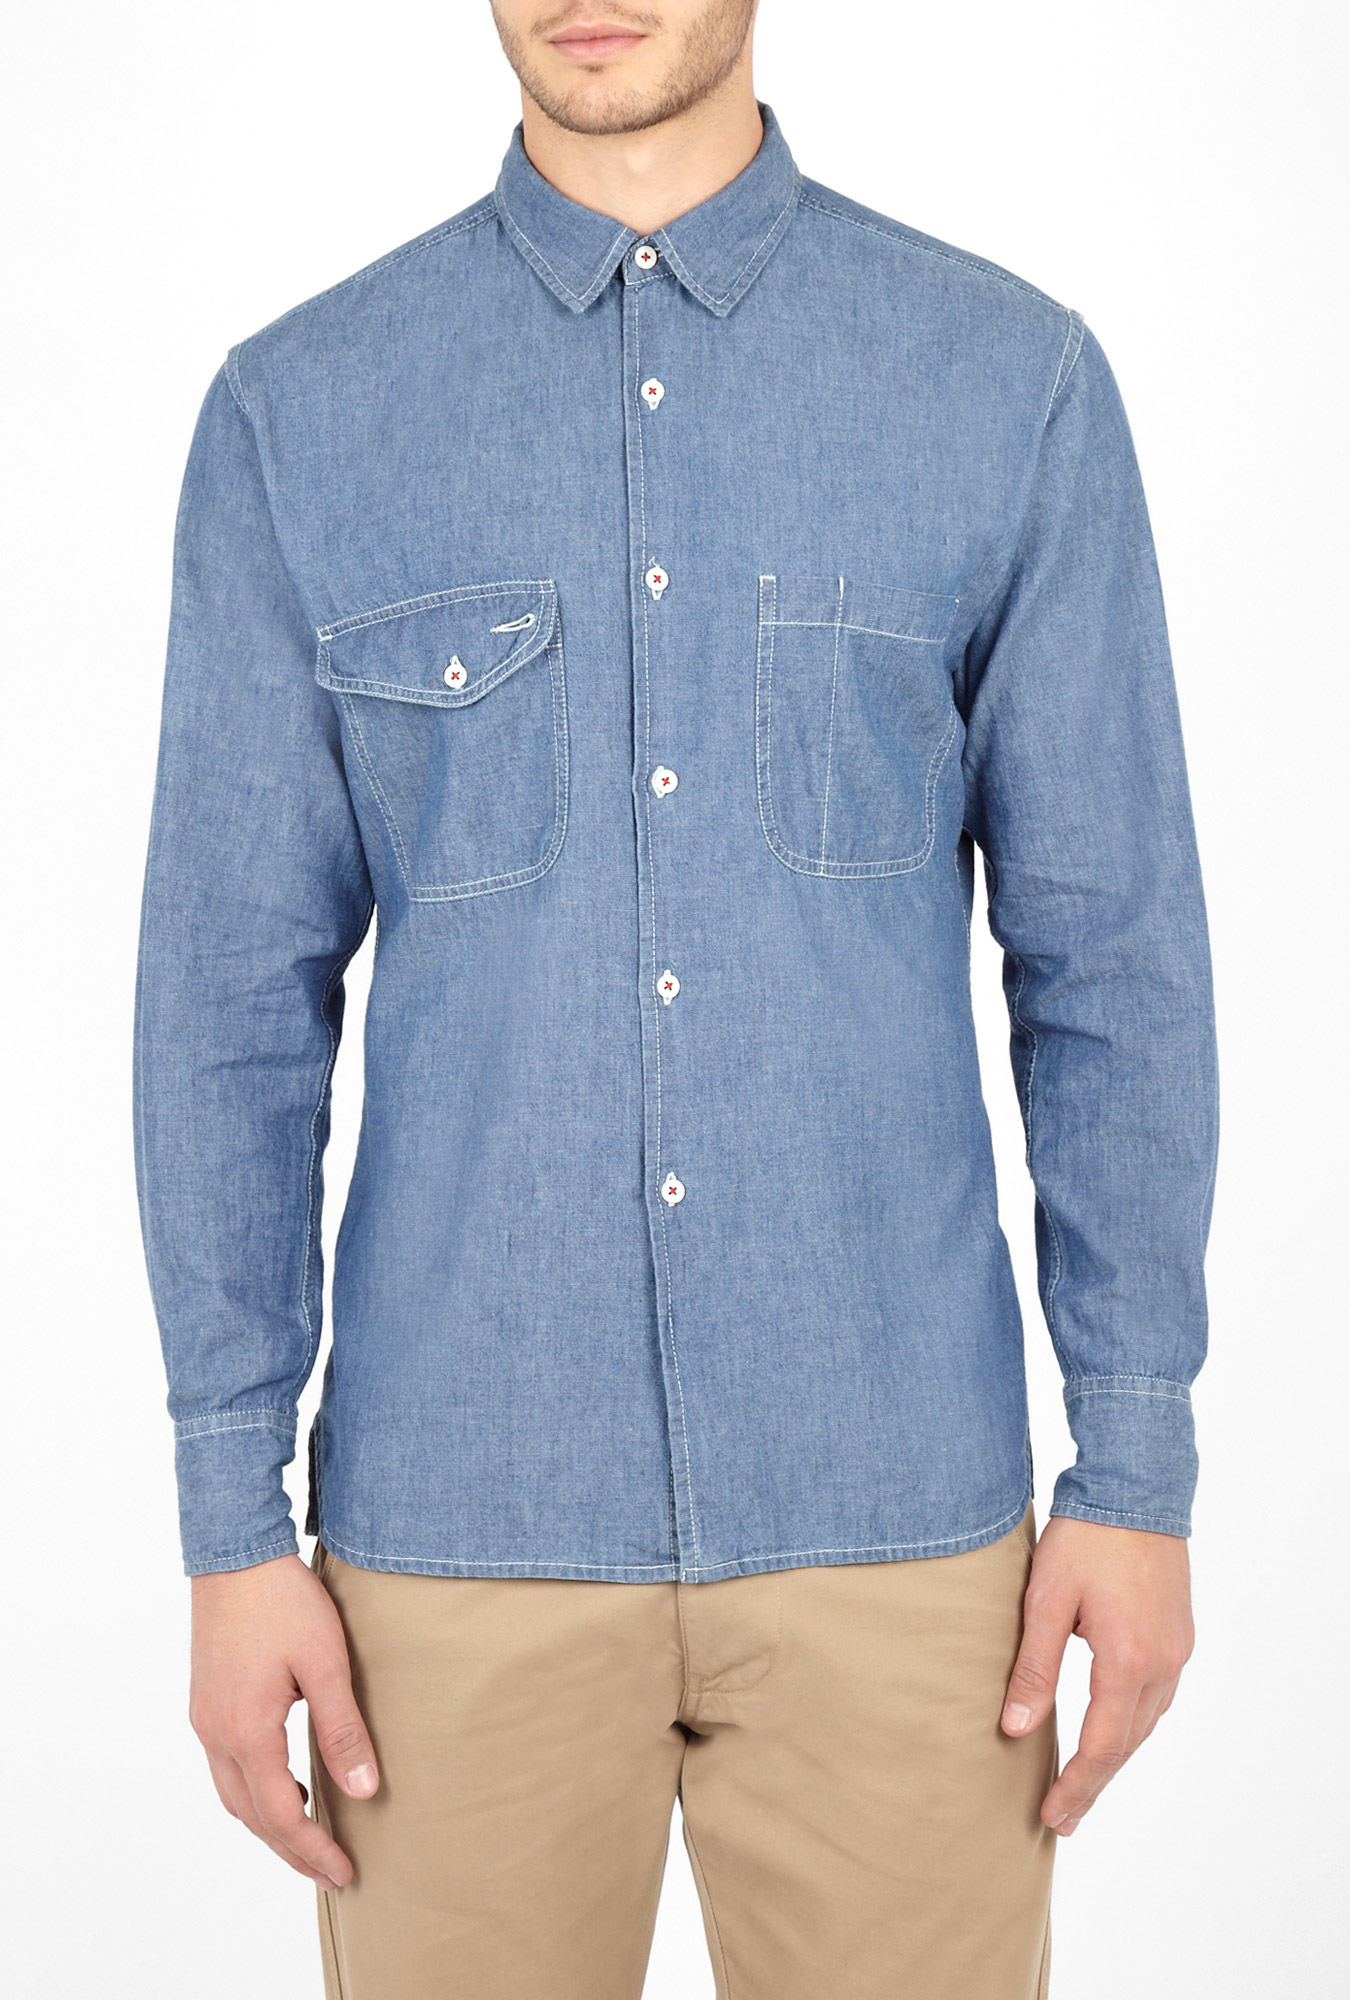 Universal Works Faded Chambray Classic Work Shirt in Blue for Men ...